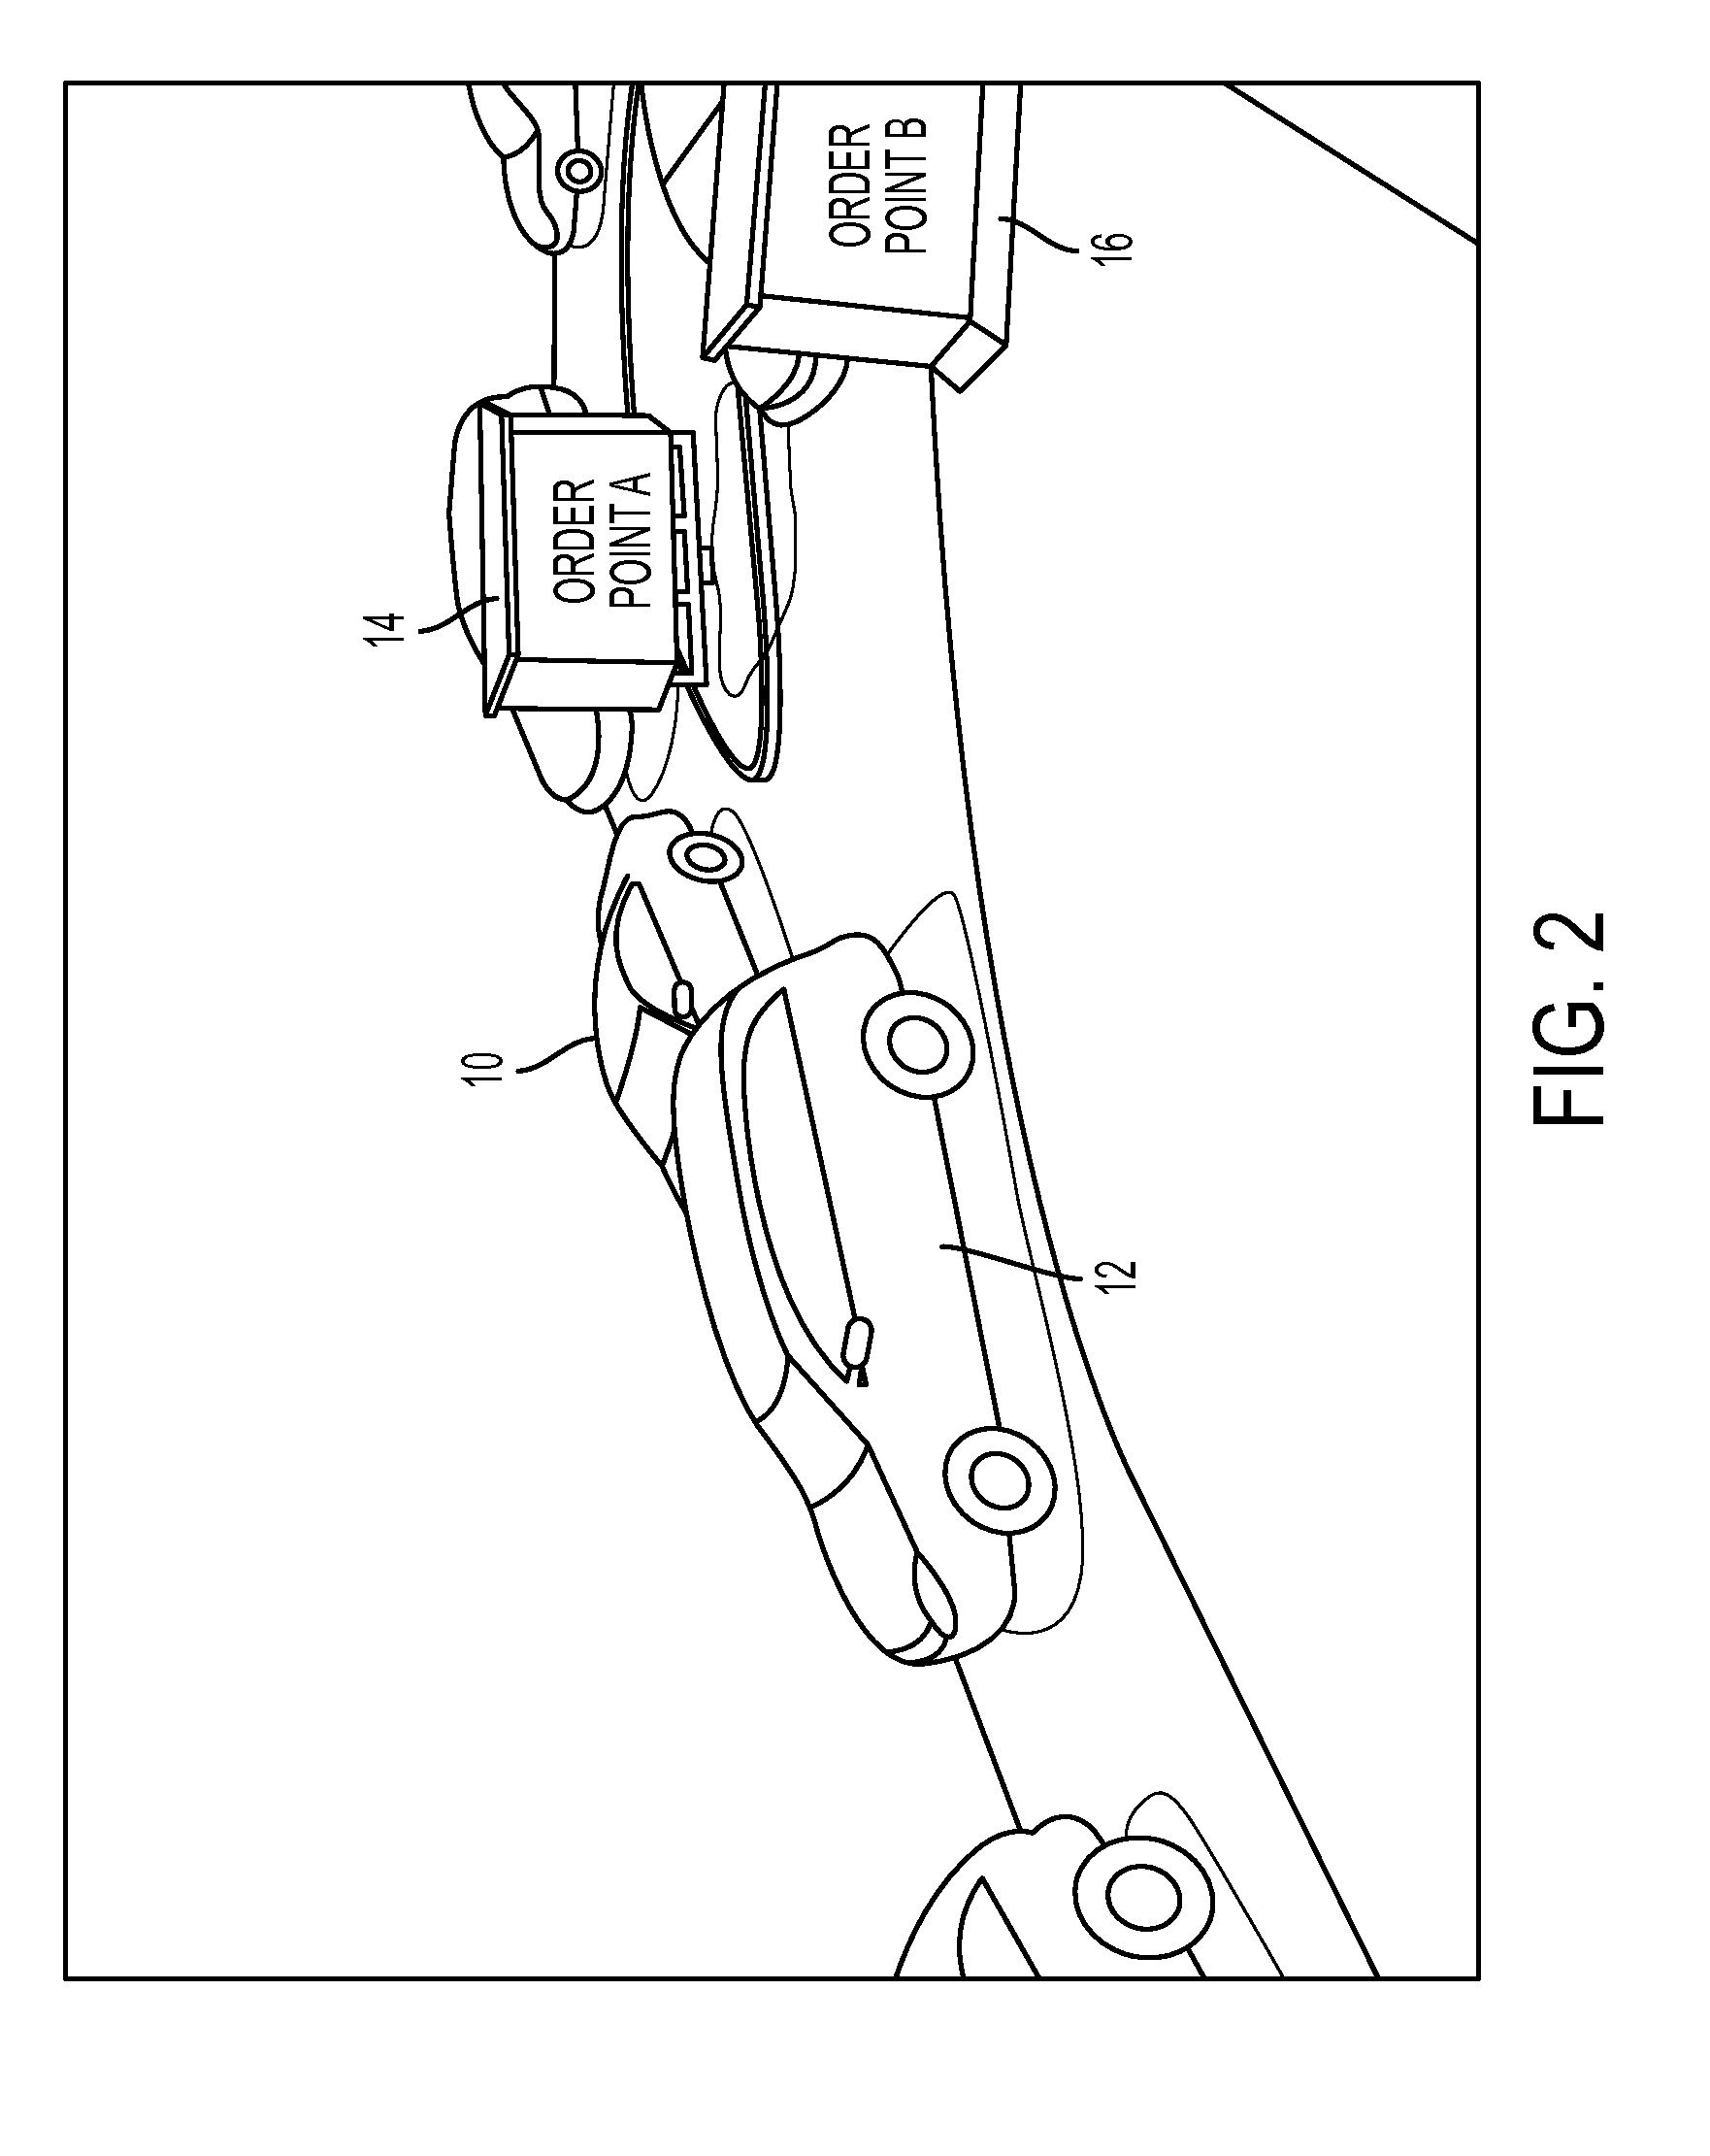 Method and system for automated sequencing of vehicles in side-by-side drive-thru configurations via appearance-based classification